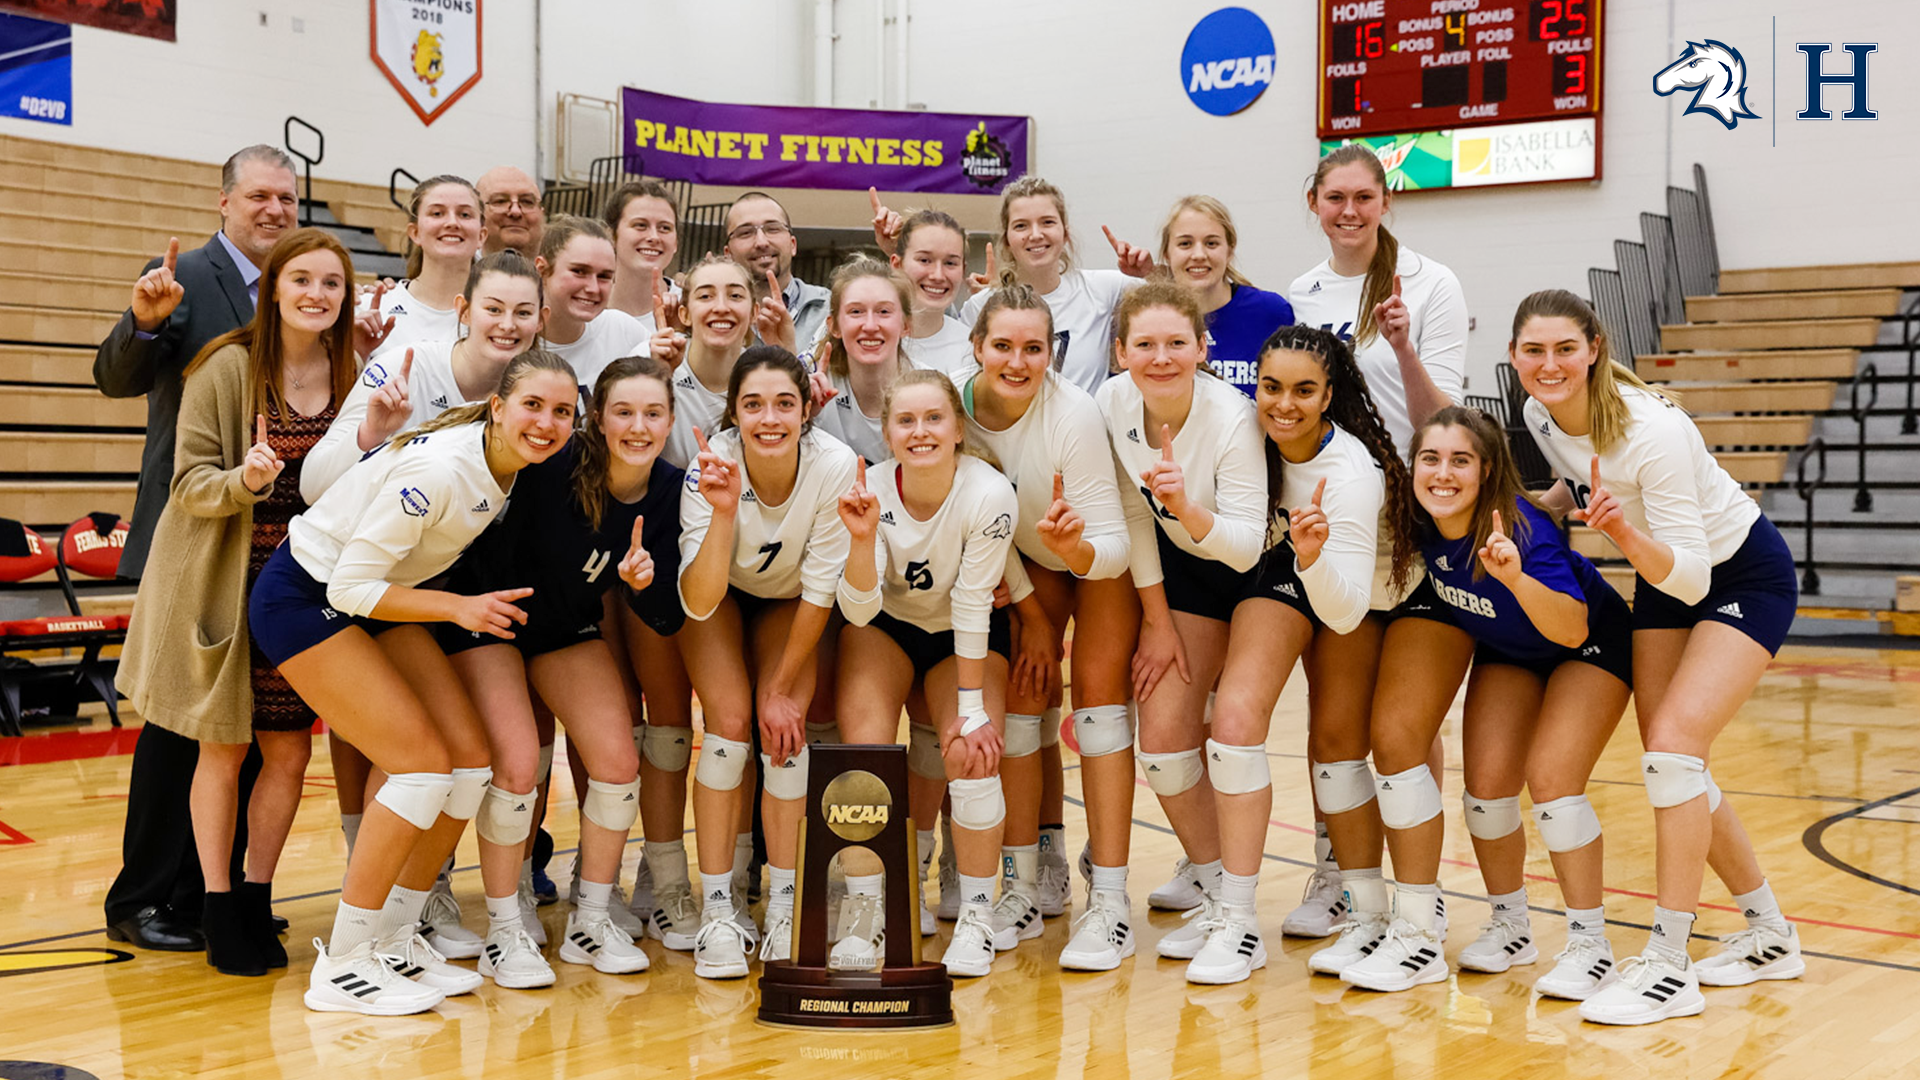 Chargers take down top-seeded Ferris St. in 4, earn program’s second-ever Midwest Regional title